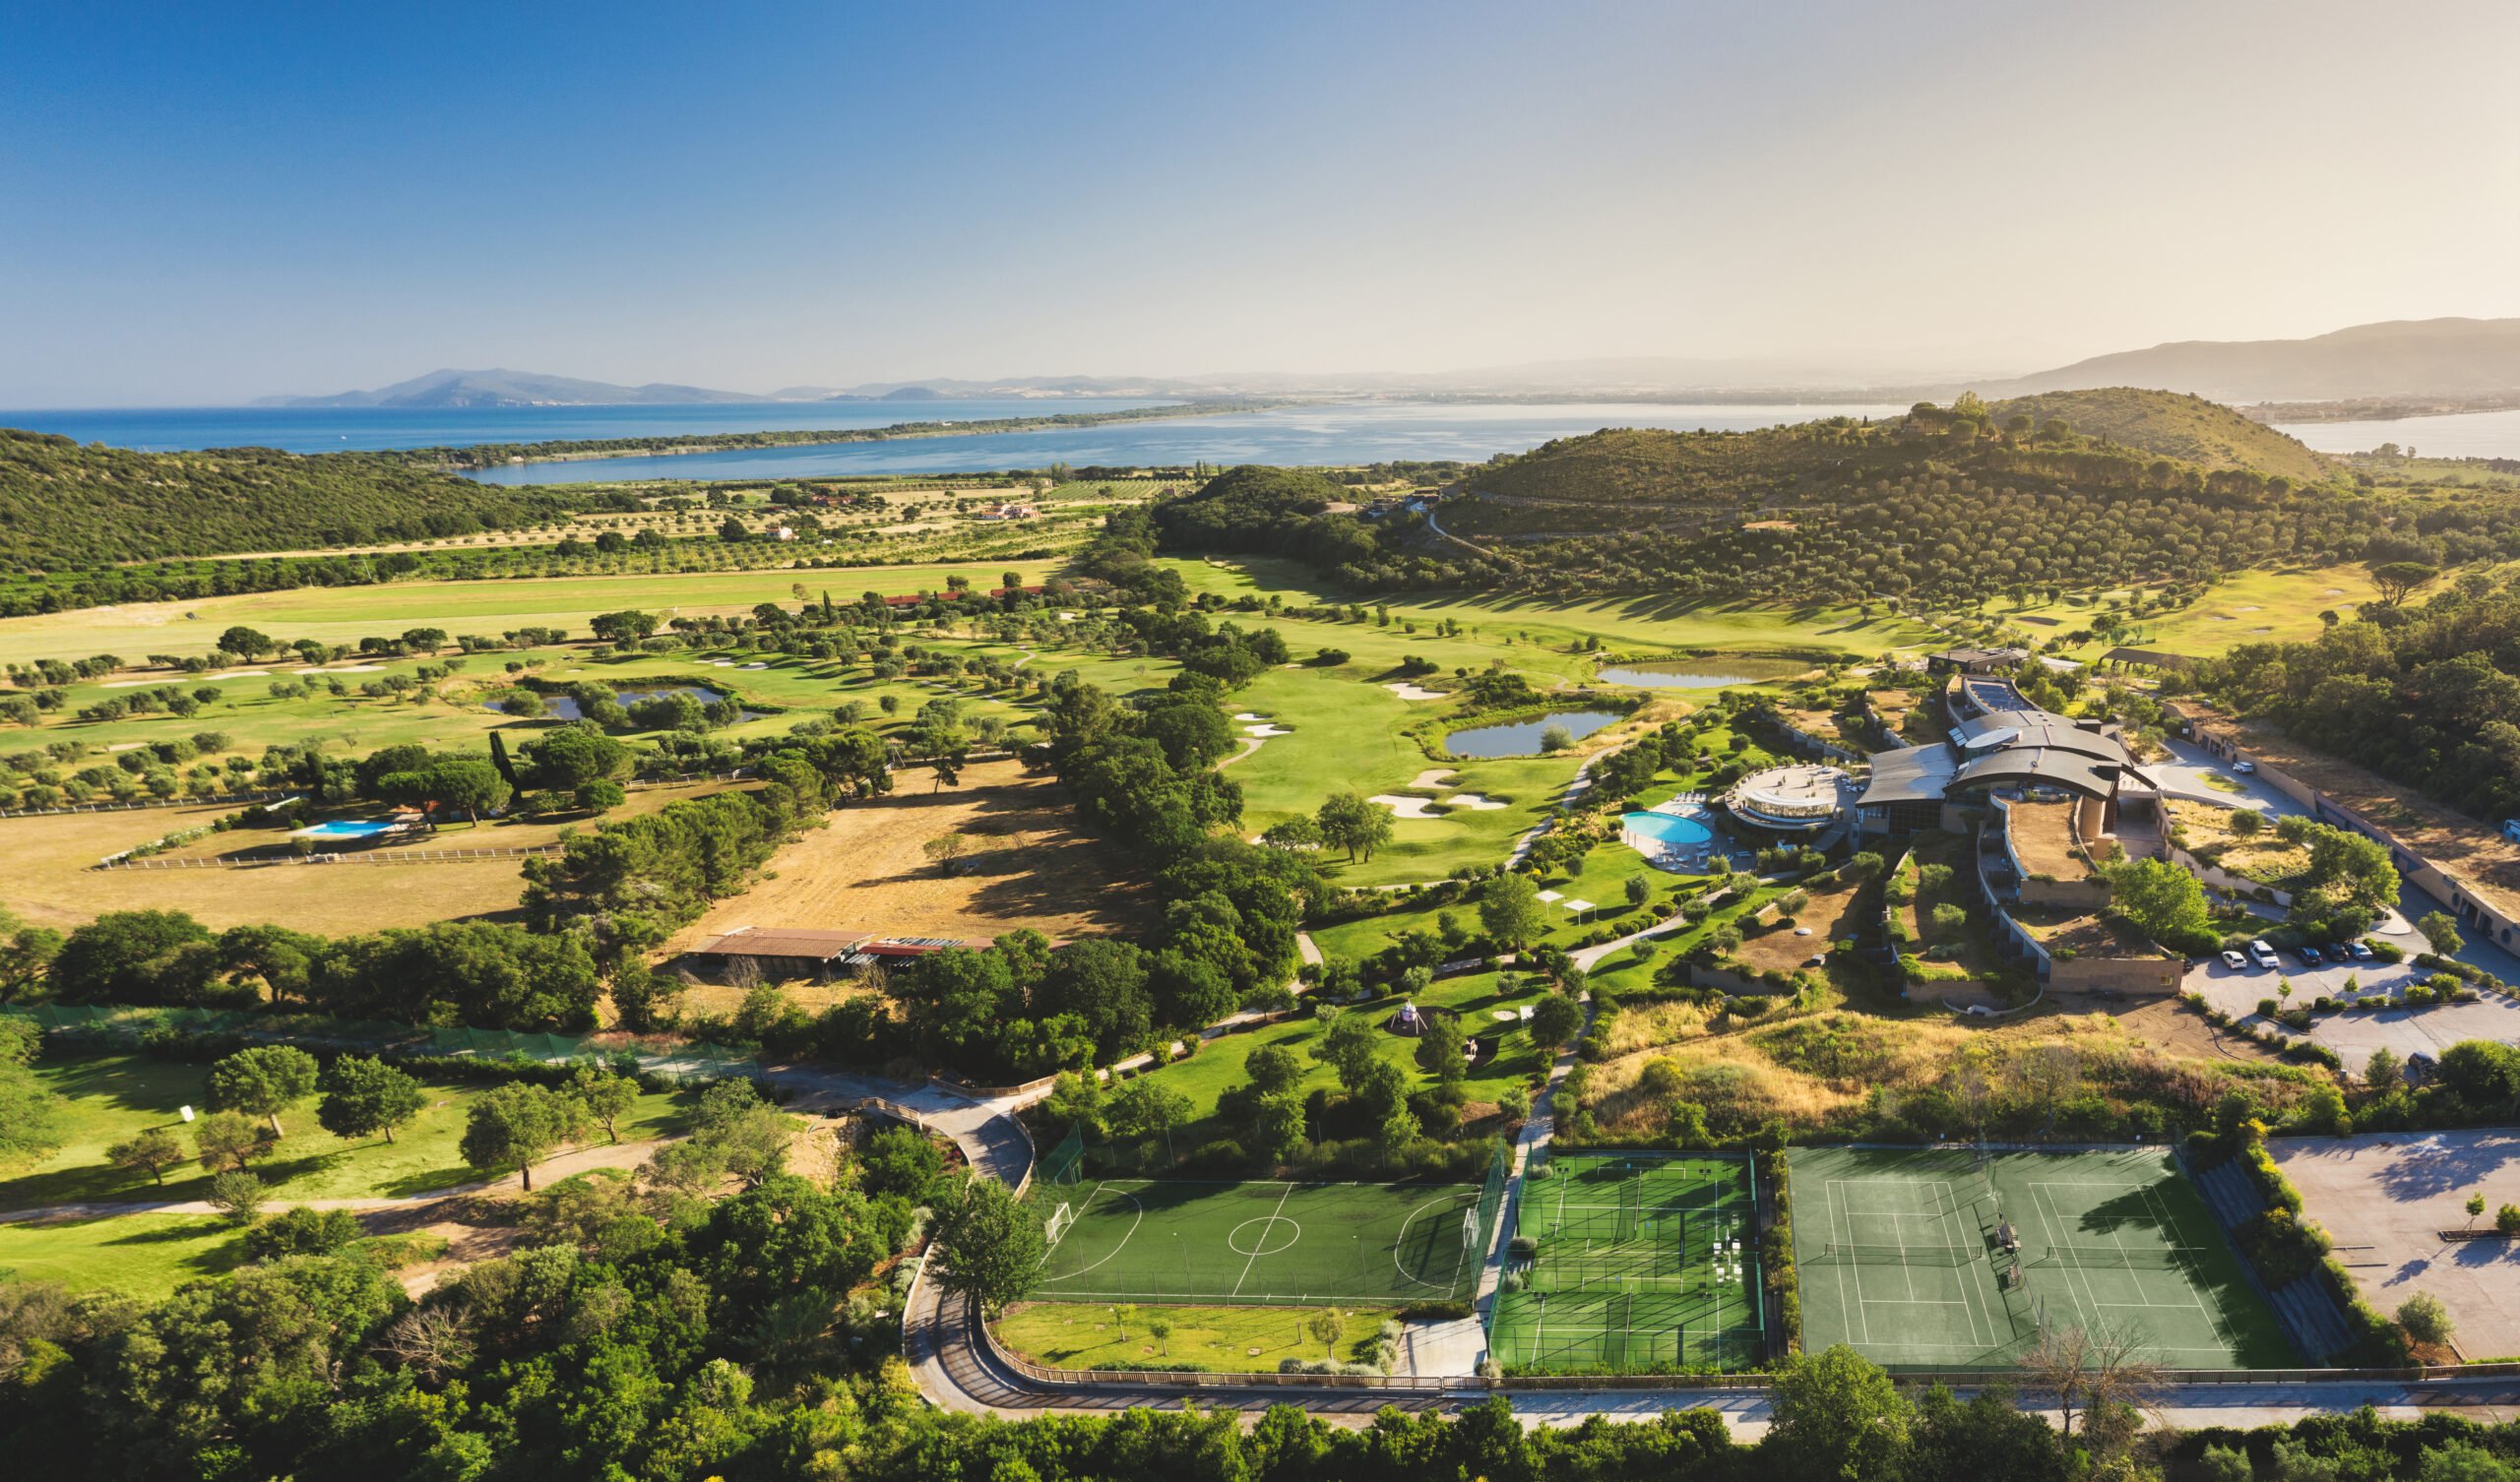 The Argentario Golf and Wellness Resort, a Slice of Tuscan Heaven